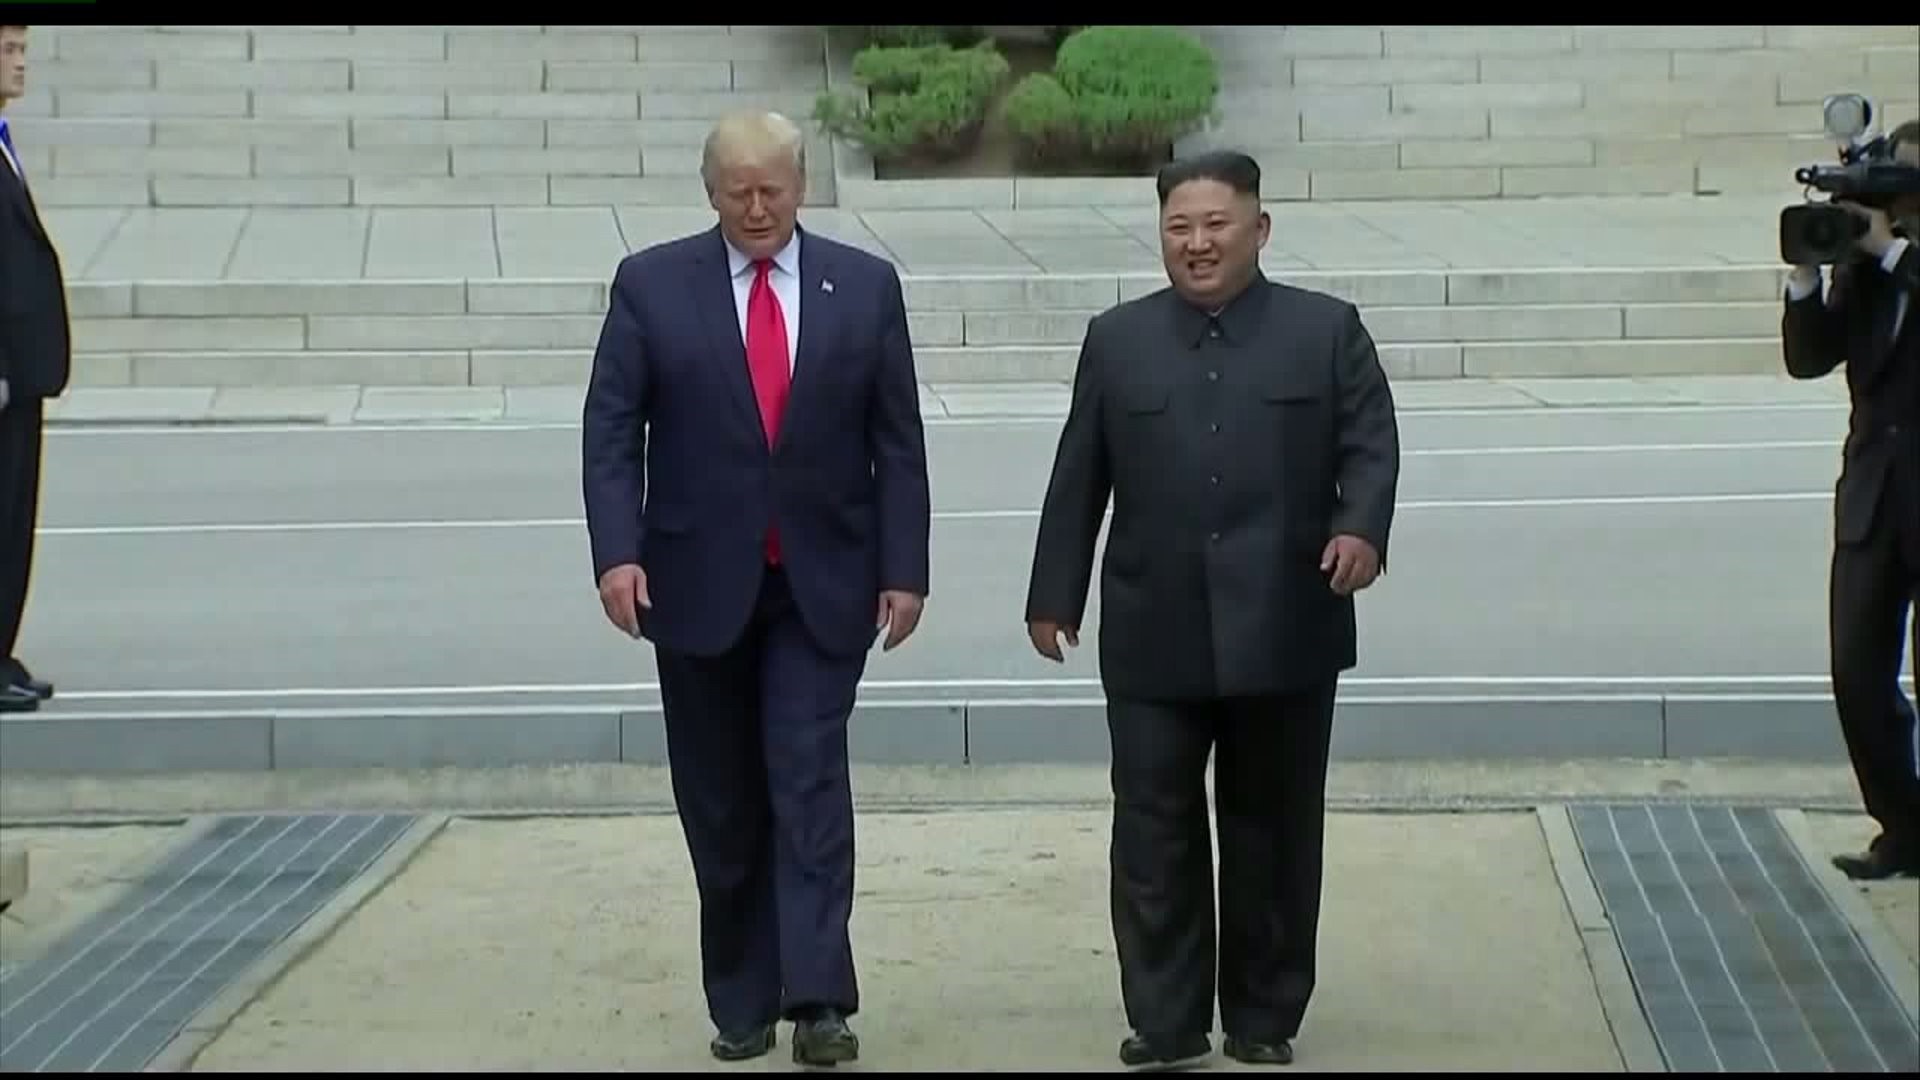 Trump becomes the first sitting US president to step in North Korea